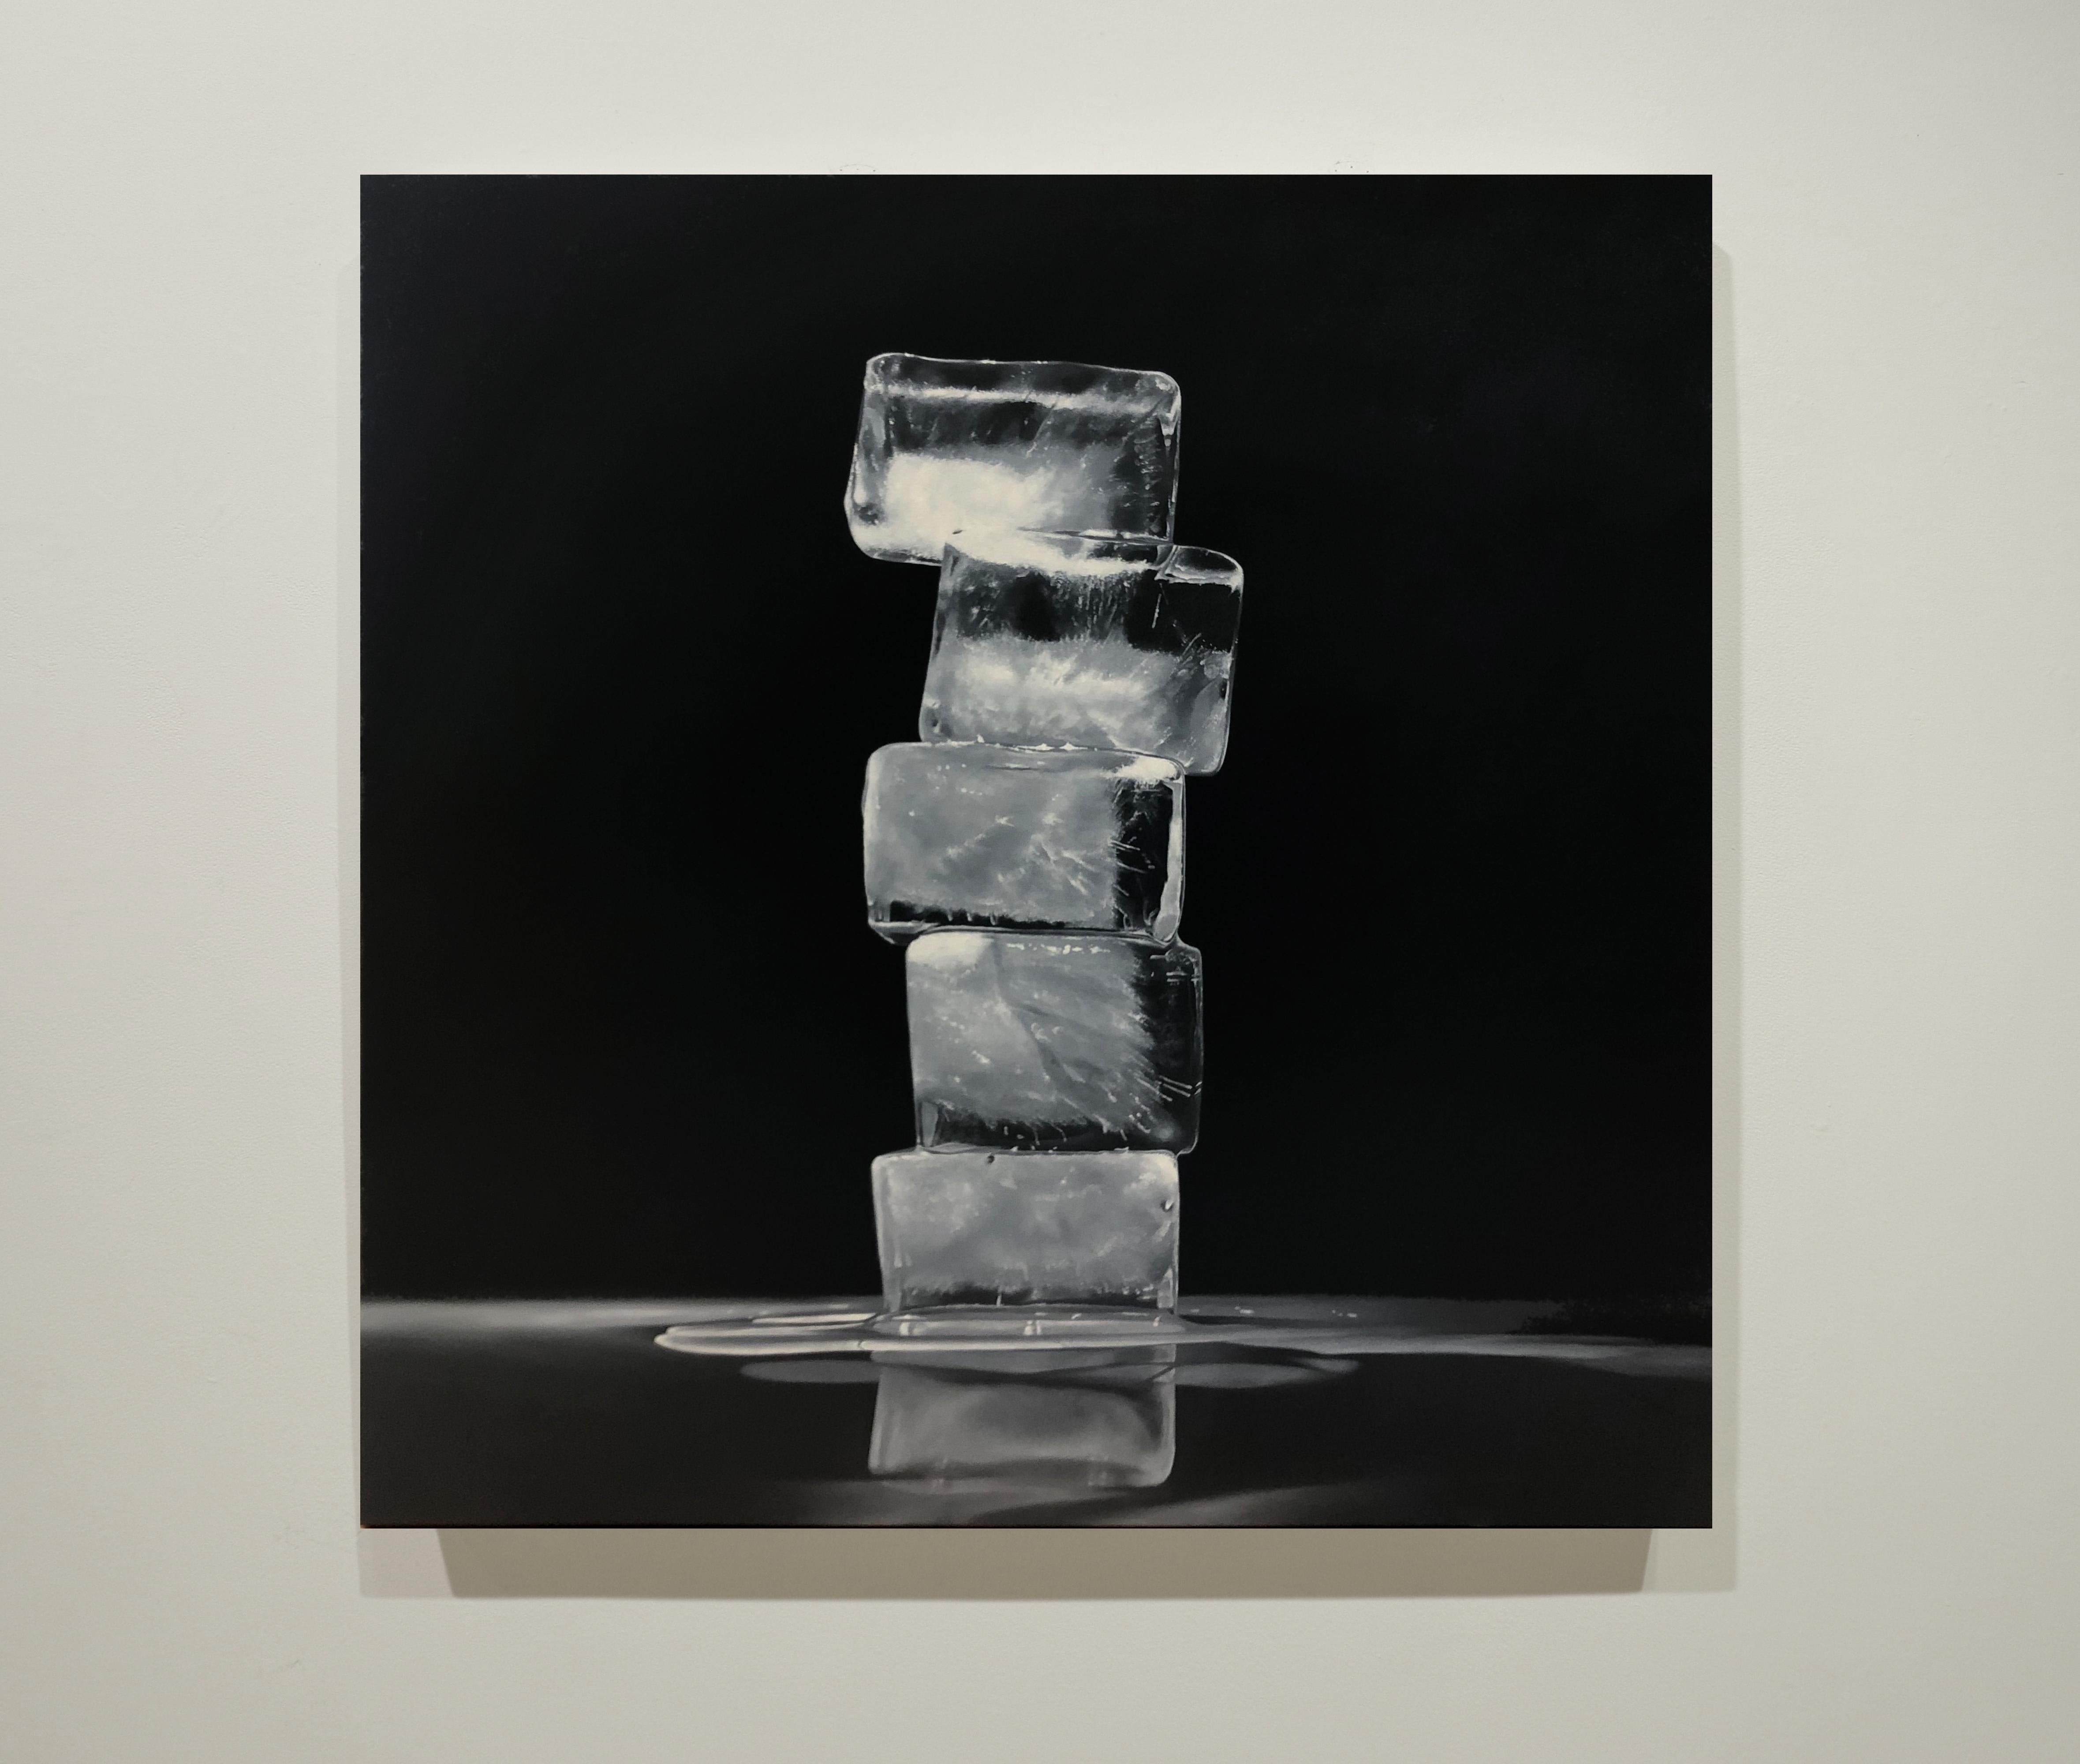 RISE AND FALL, OBELISK 2, photo-realism, black and white, monochrome, ice cubes - Painting by Kevin Palme